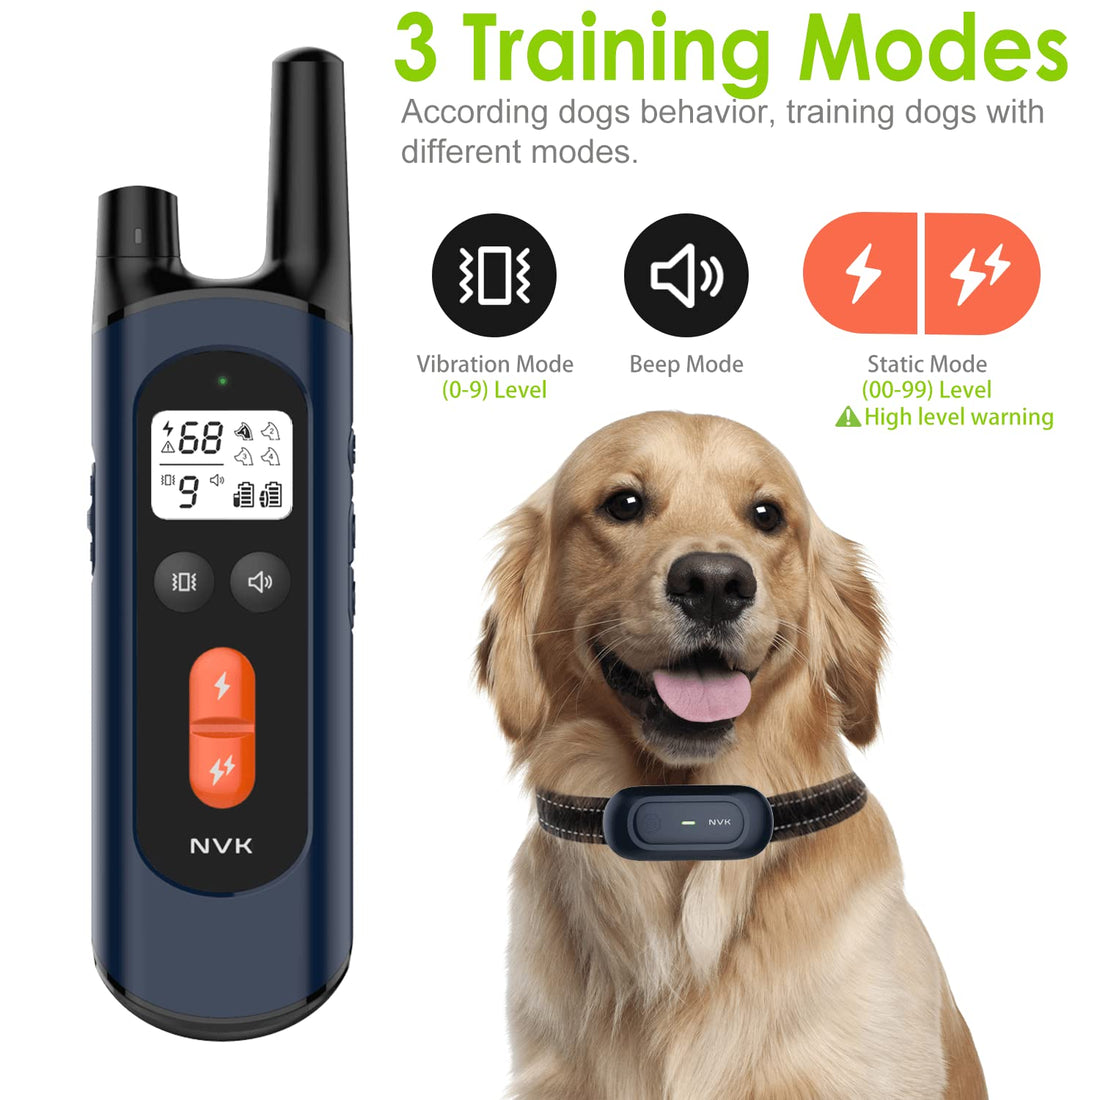 NVK Dog Training Remote, Single Multifunction Remote Without Collar for Small Medium Large Dogs